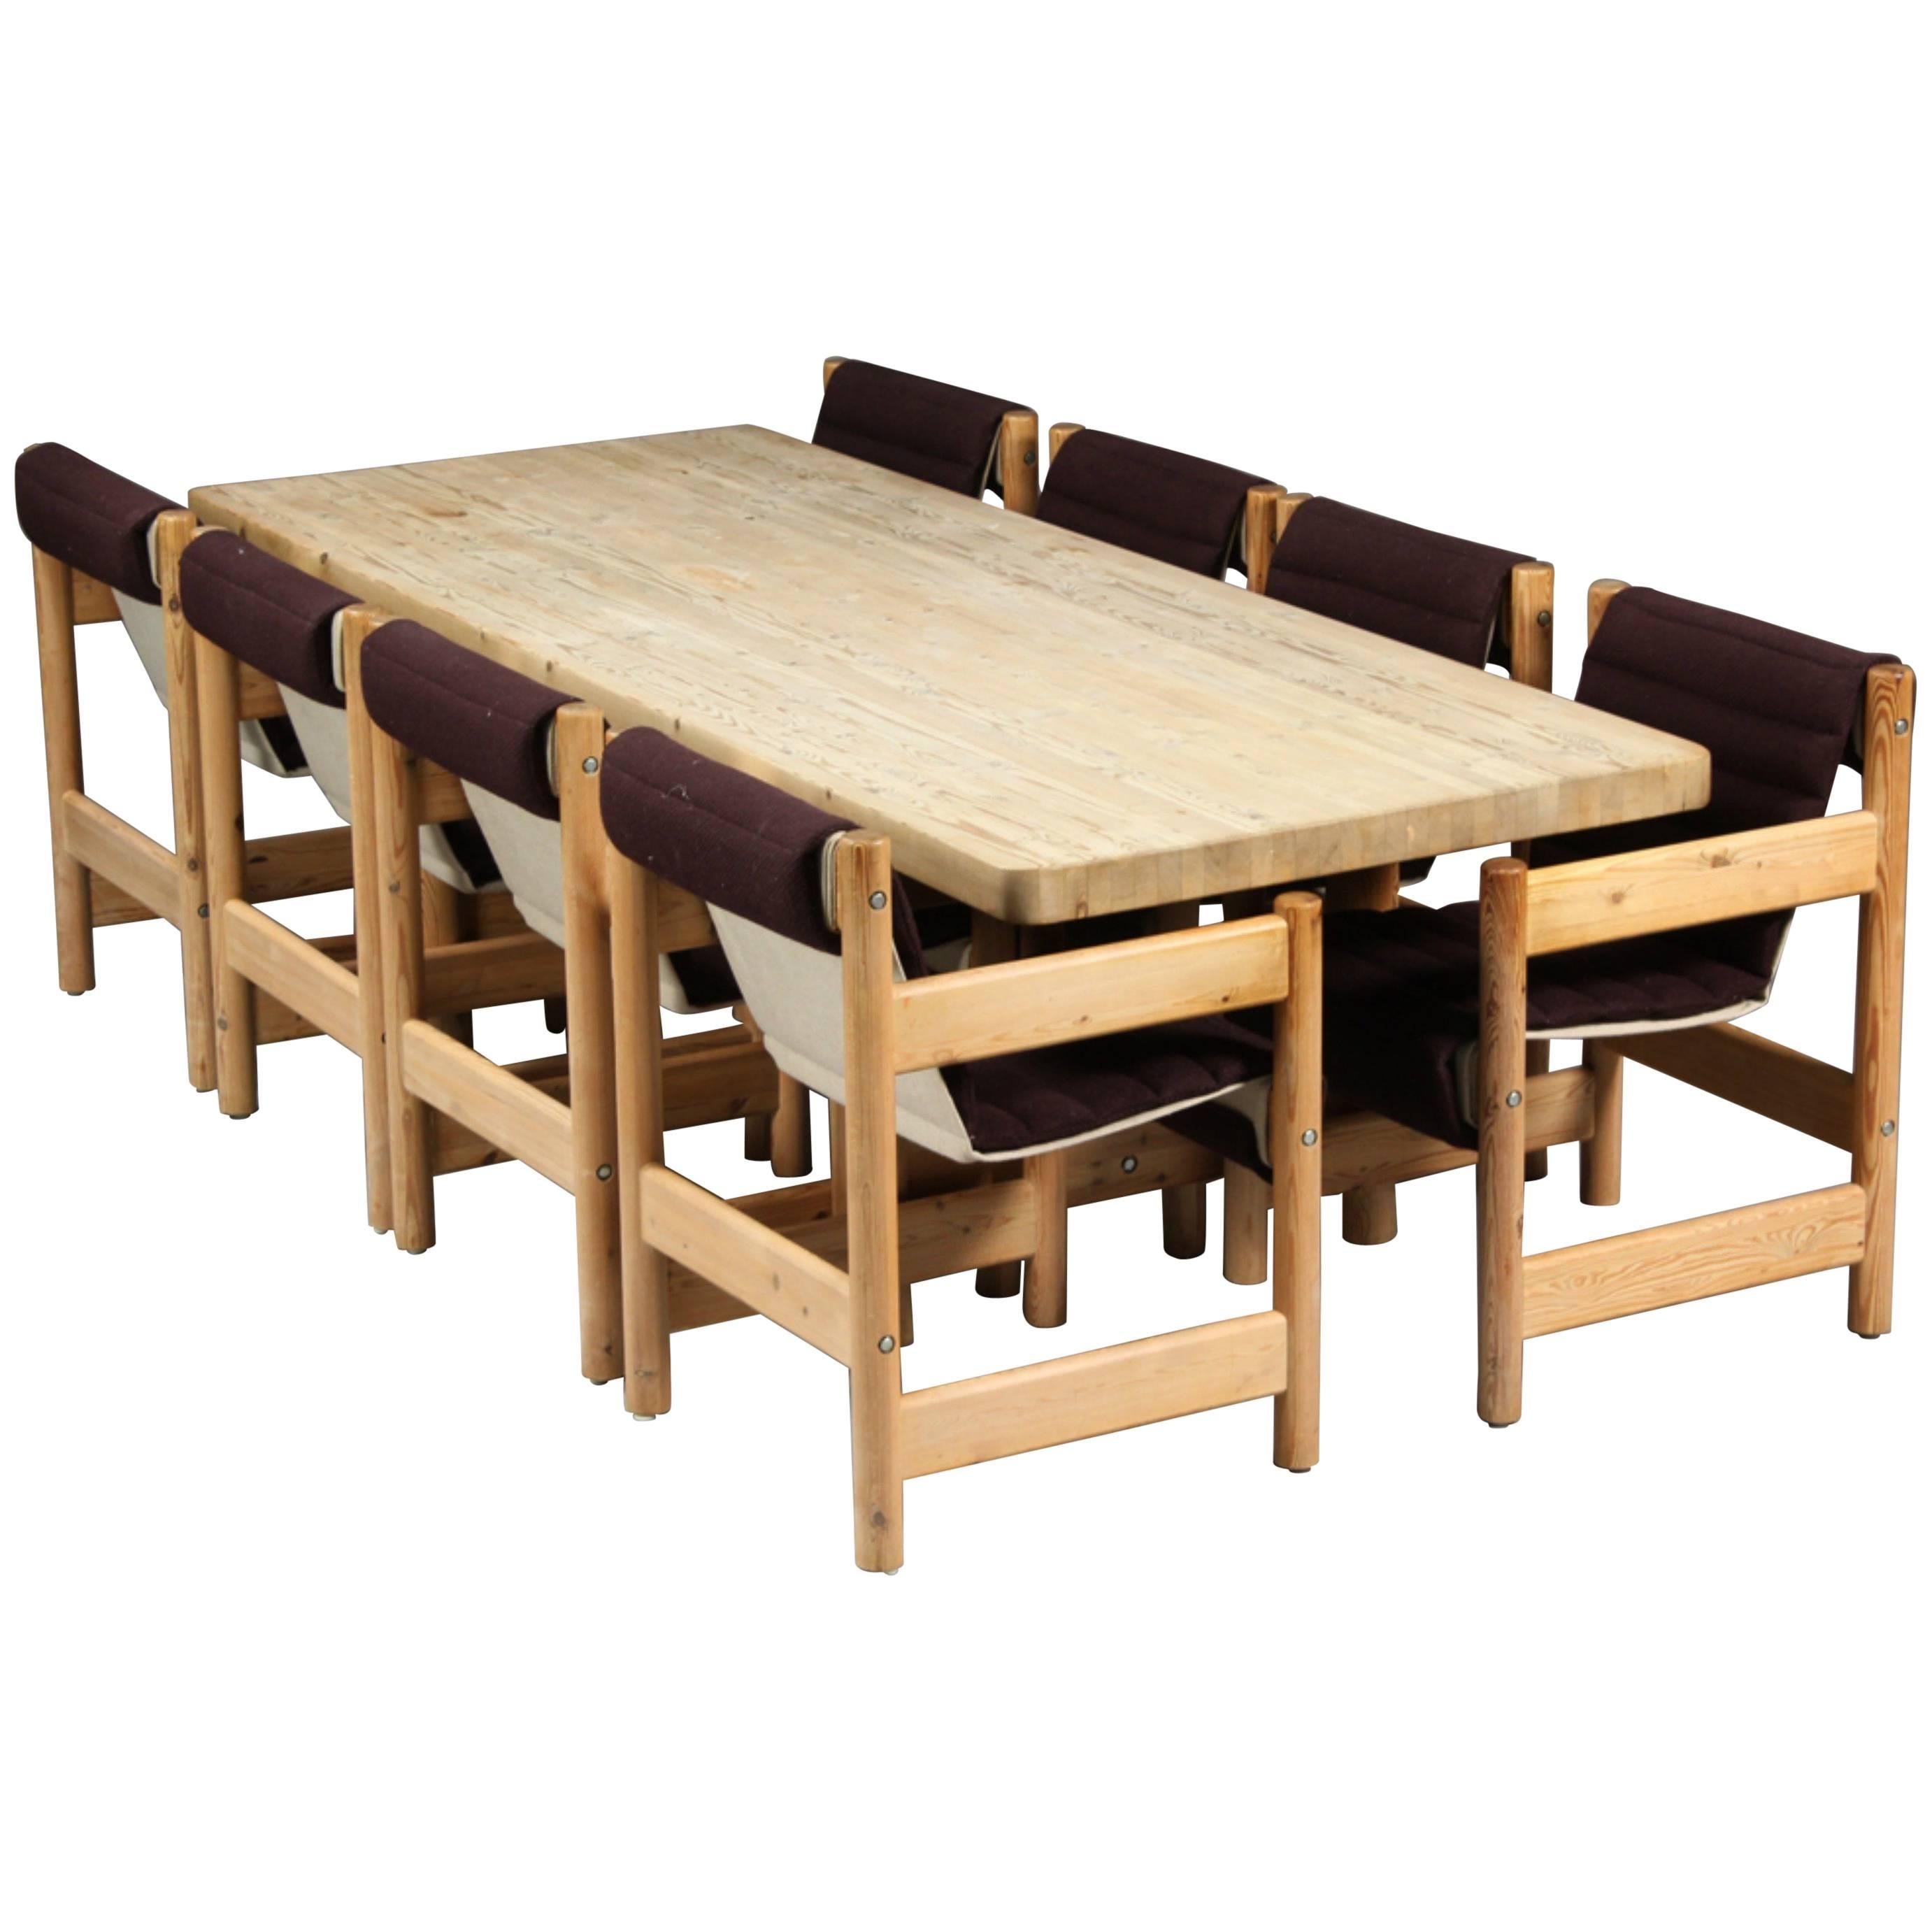 Børge Mogensen Style Dining Table and Chairs in Pine, Danish, Midcentury